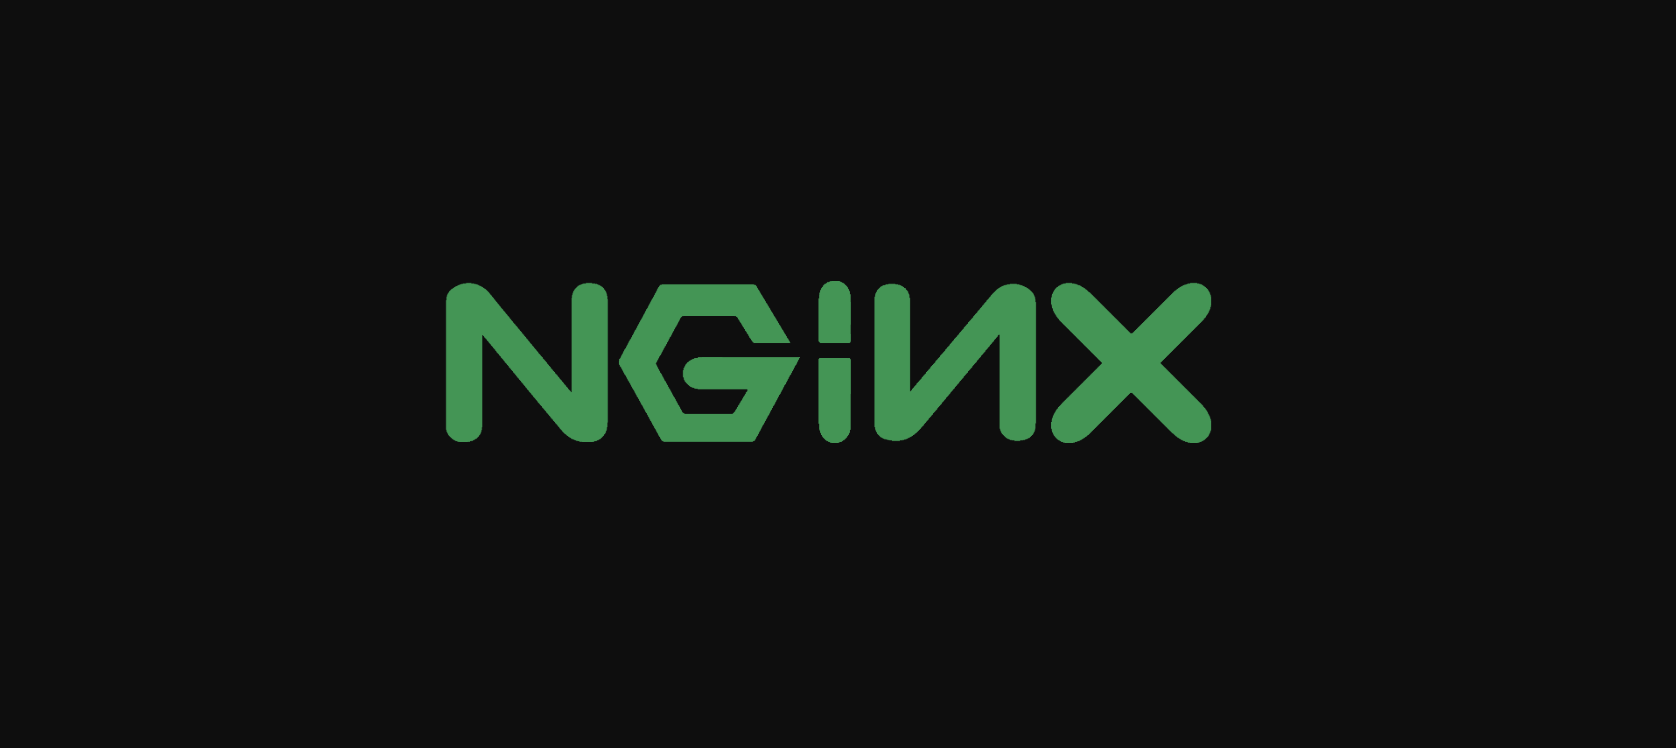 nginx-logo-ie-frame-display-issue